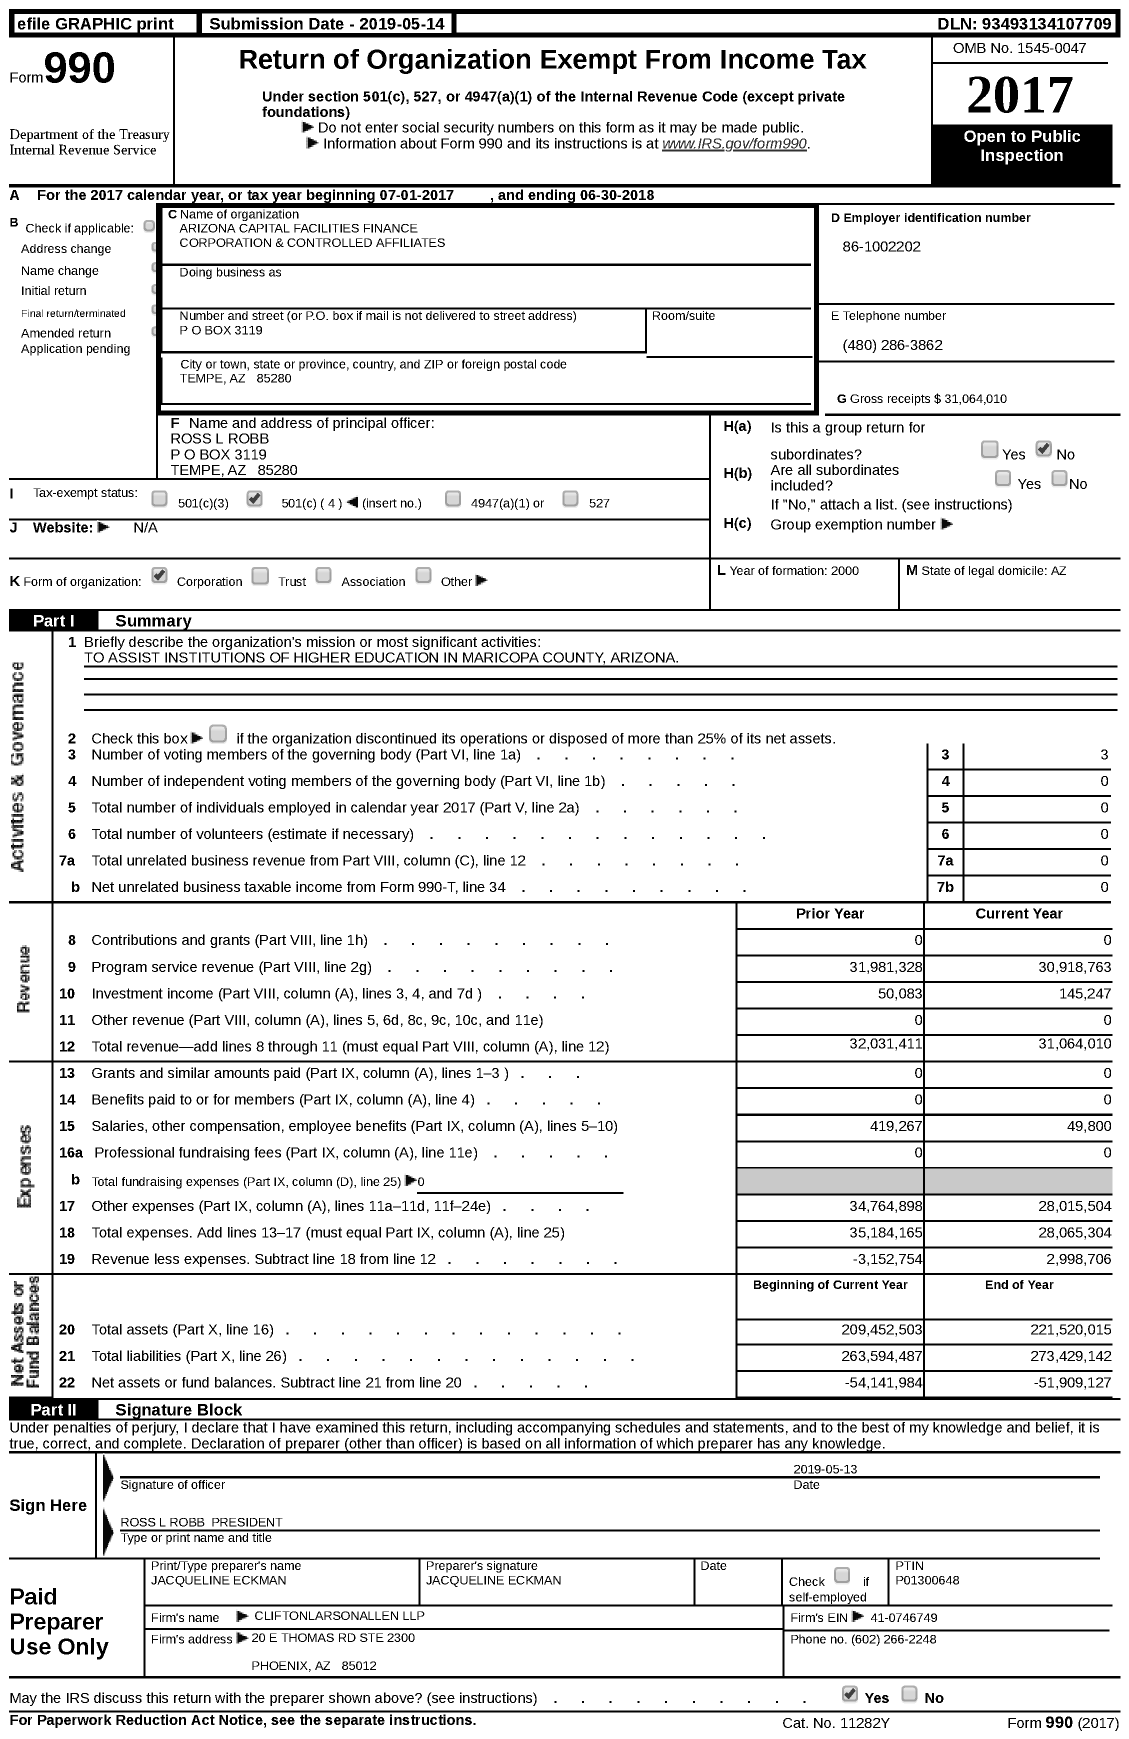 Image of first page of 2017 Form 990 for Arizona Capital Facilities Finance Corporation and Controlled Affiliates